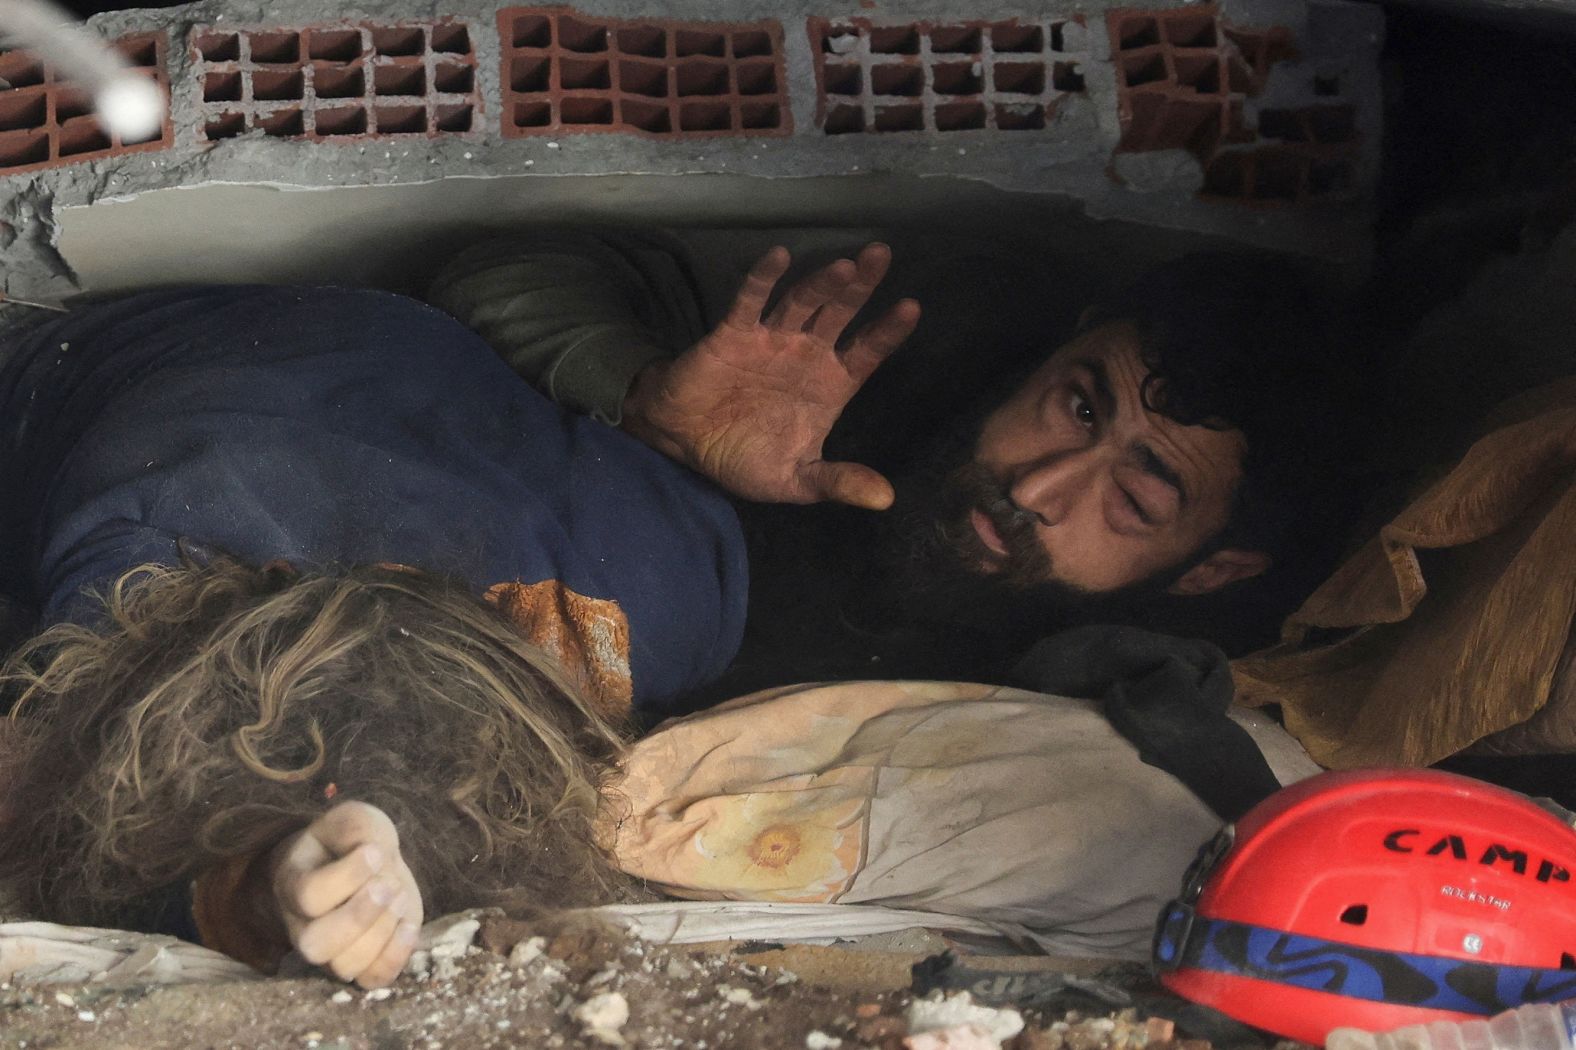 Abdulalim Muaini lies under the rubble next to the body of his wife, Esra, in Hatay on February 8. <a href="index.php?page=&url=https%3A%2F%2Fwww.reuters.com%2Fworld%2Fmiddle-east%2Fpicture-its-story-man-who-survived-turkey-earthquake-his-family-who-didnt-2023-02-08%2F" target="_blank" target="_blank">Reuters reported</a> that he was pulled out of the rubble later and survived. His children also died.